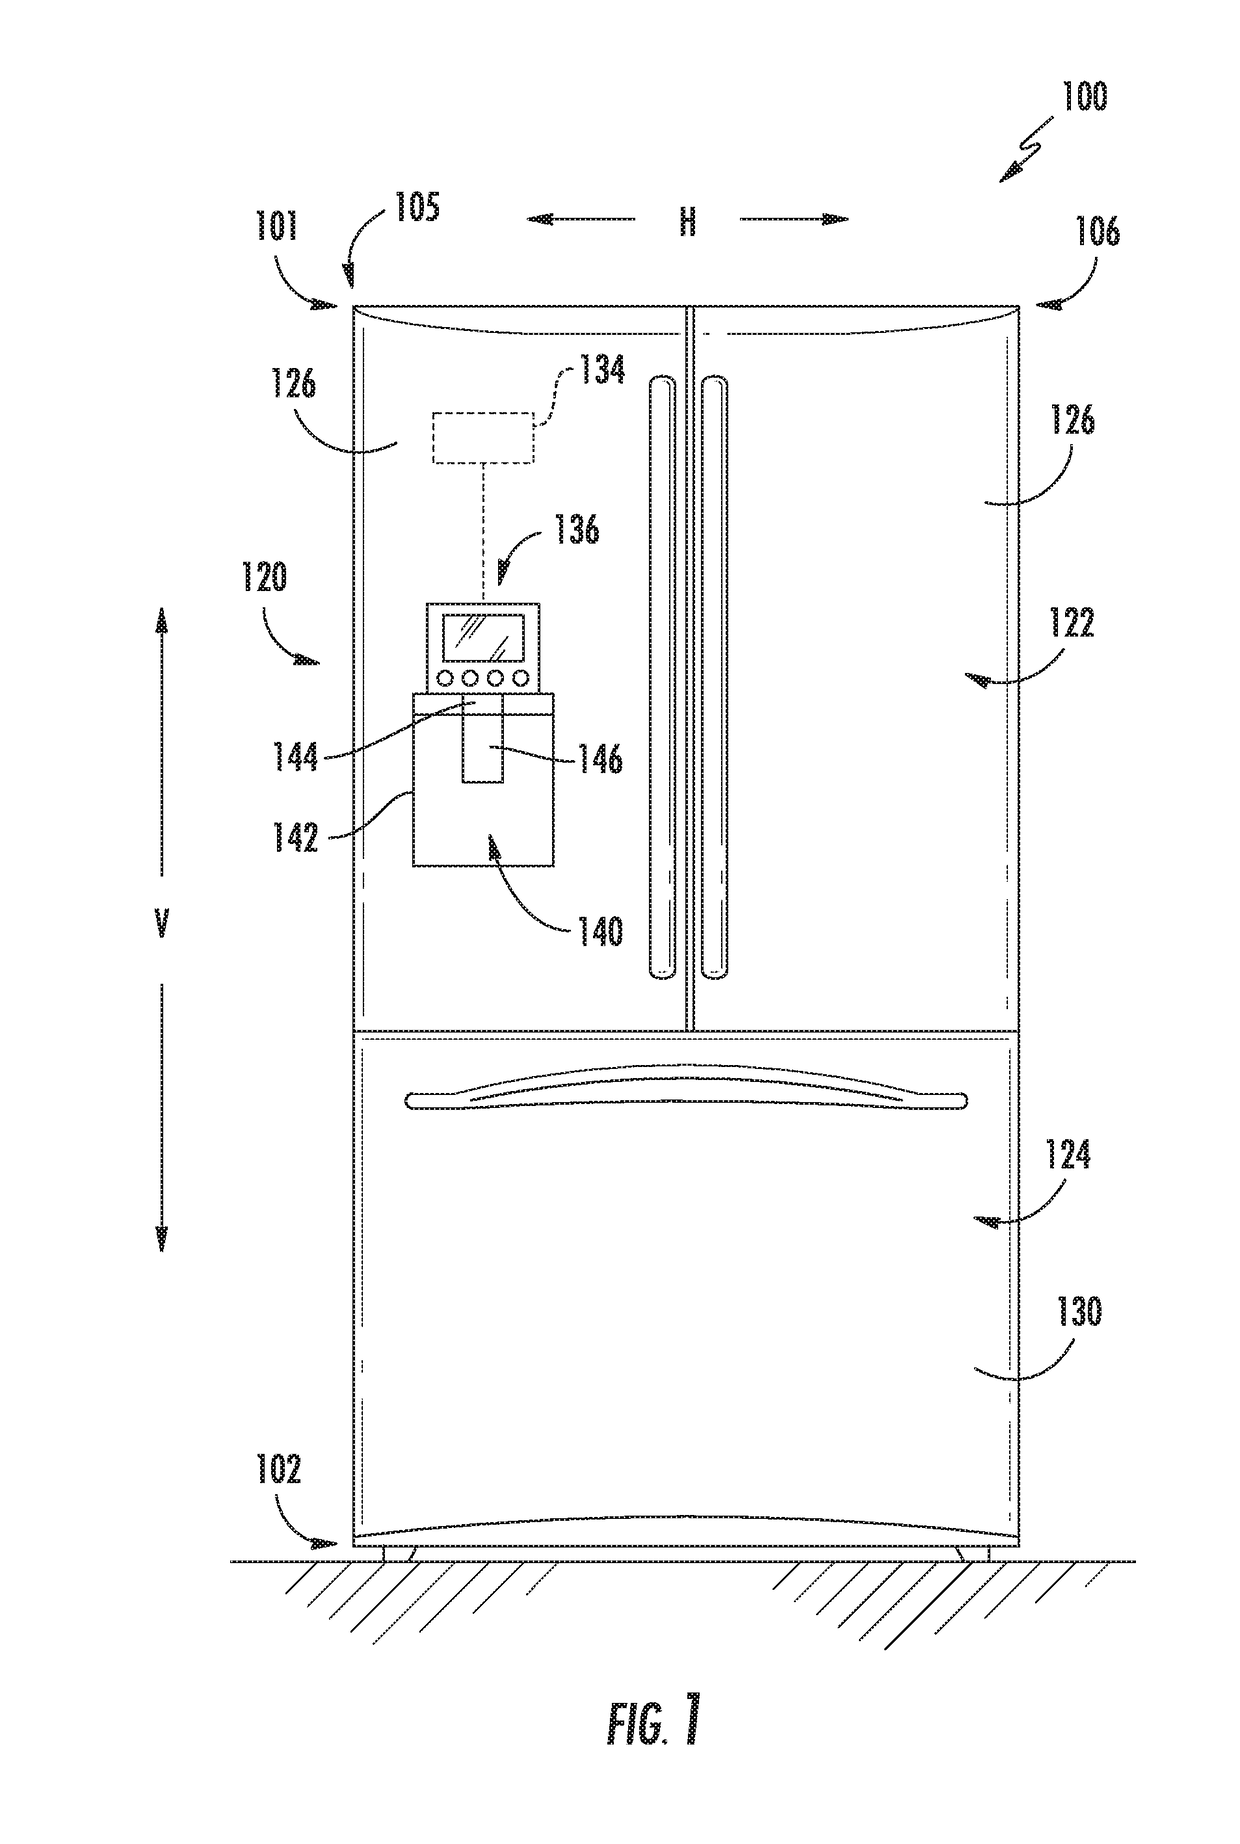 Ice making system for refrigerator appliance